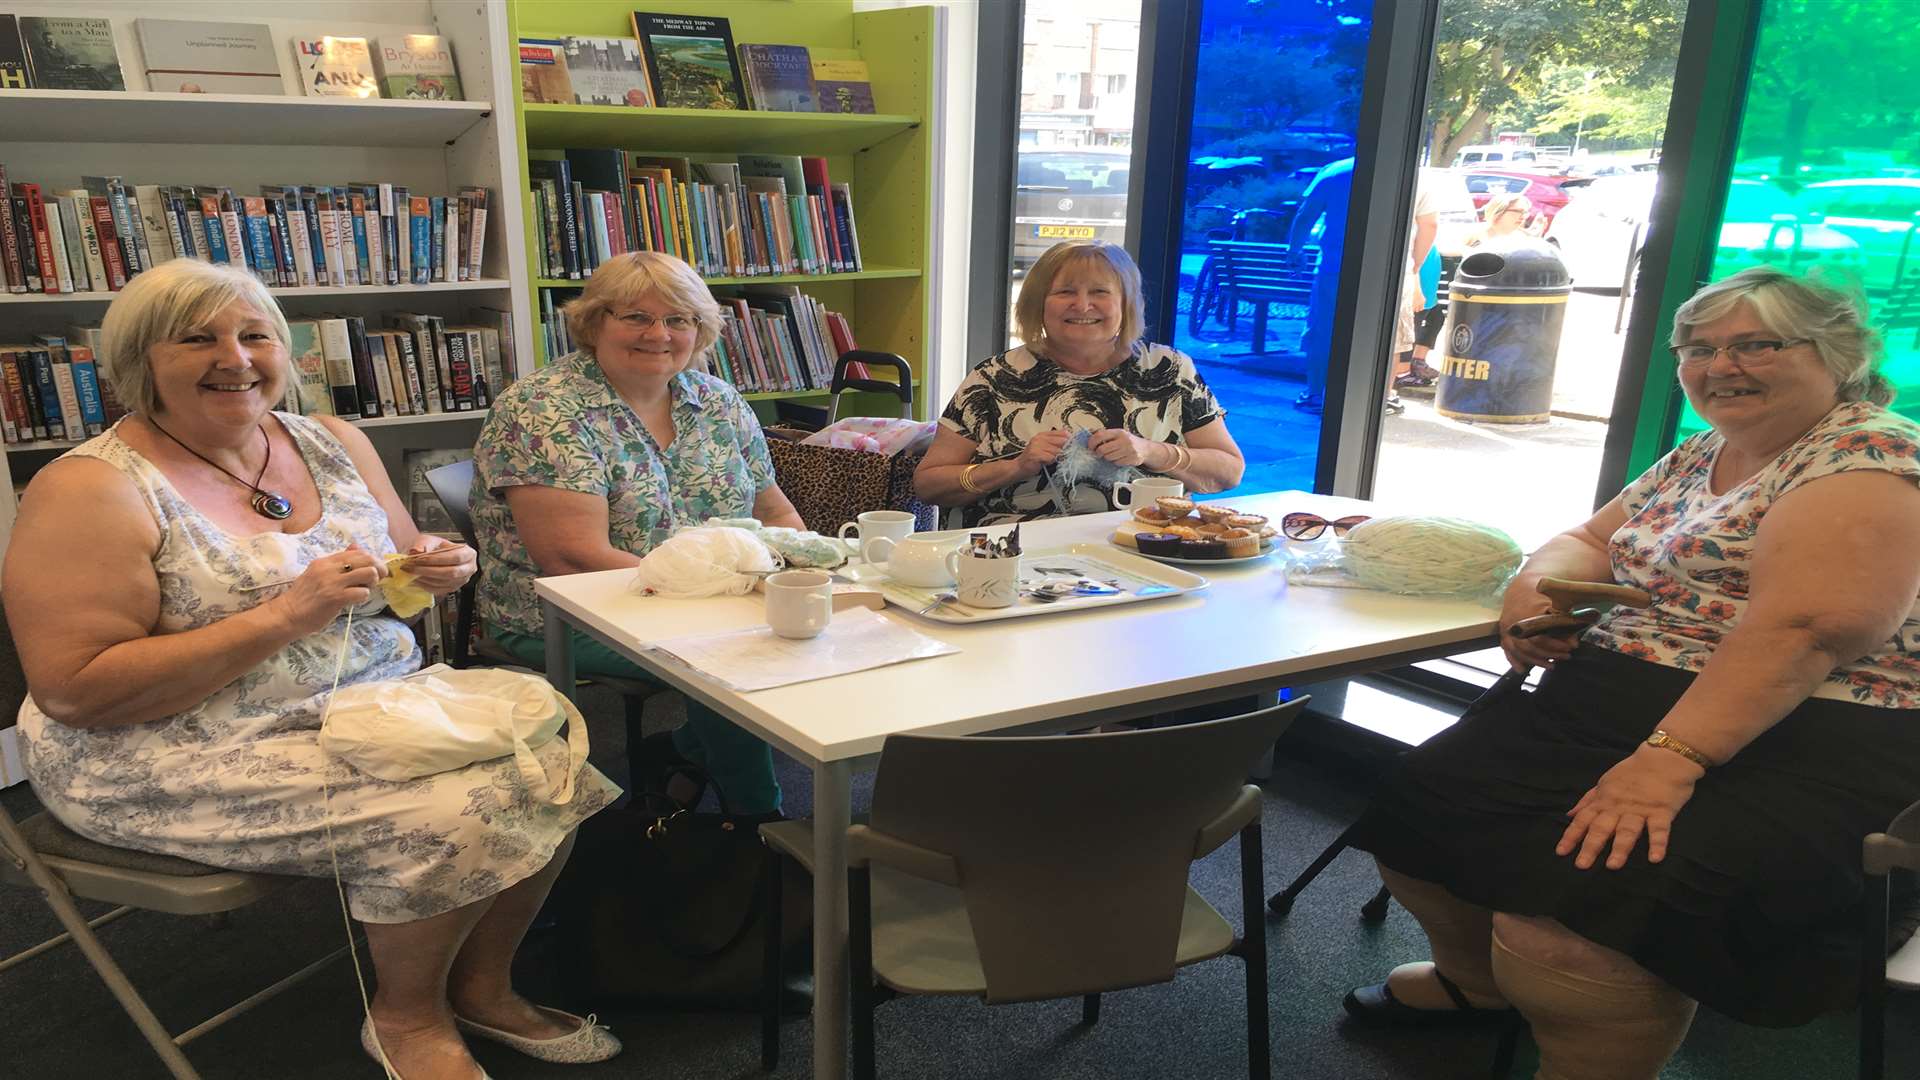 Lin White, Rose Hicks, Sheila Harris and Rosemary Wimble, from the Knit and Natter group